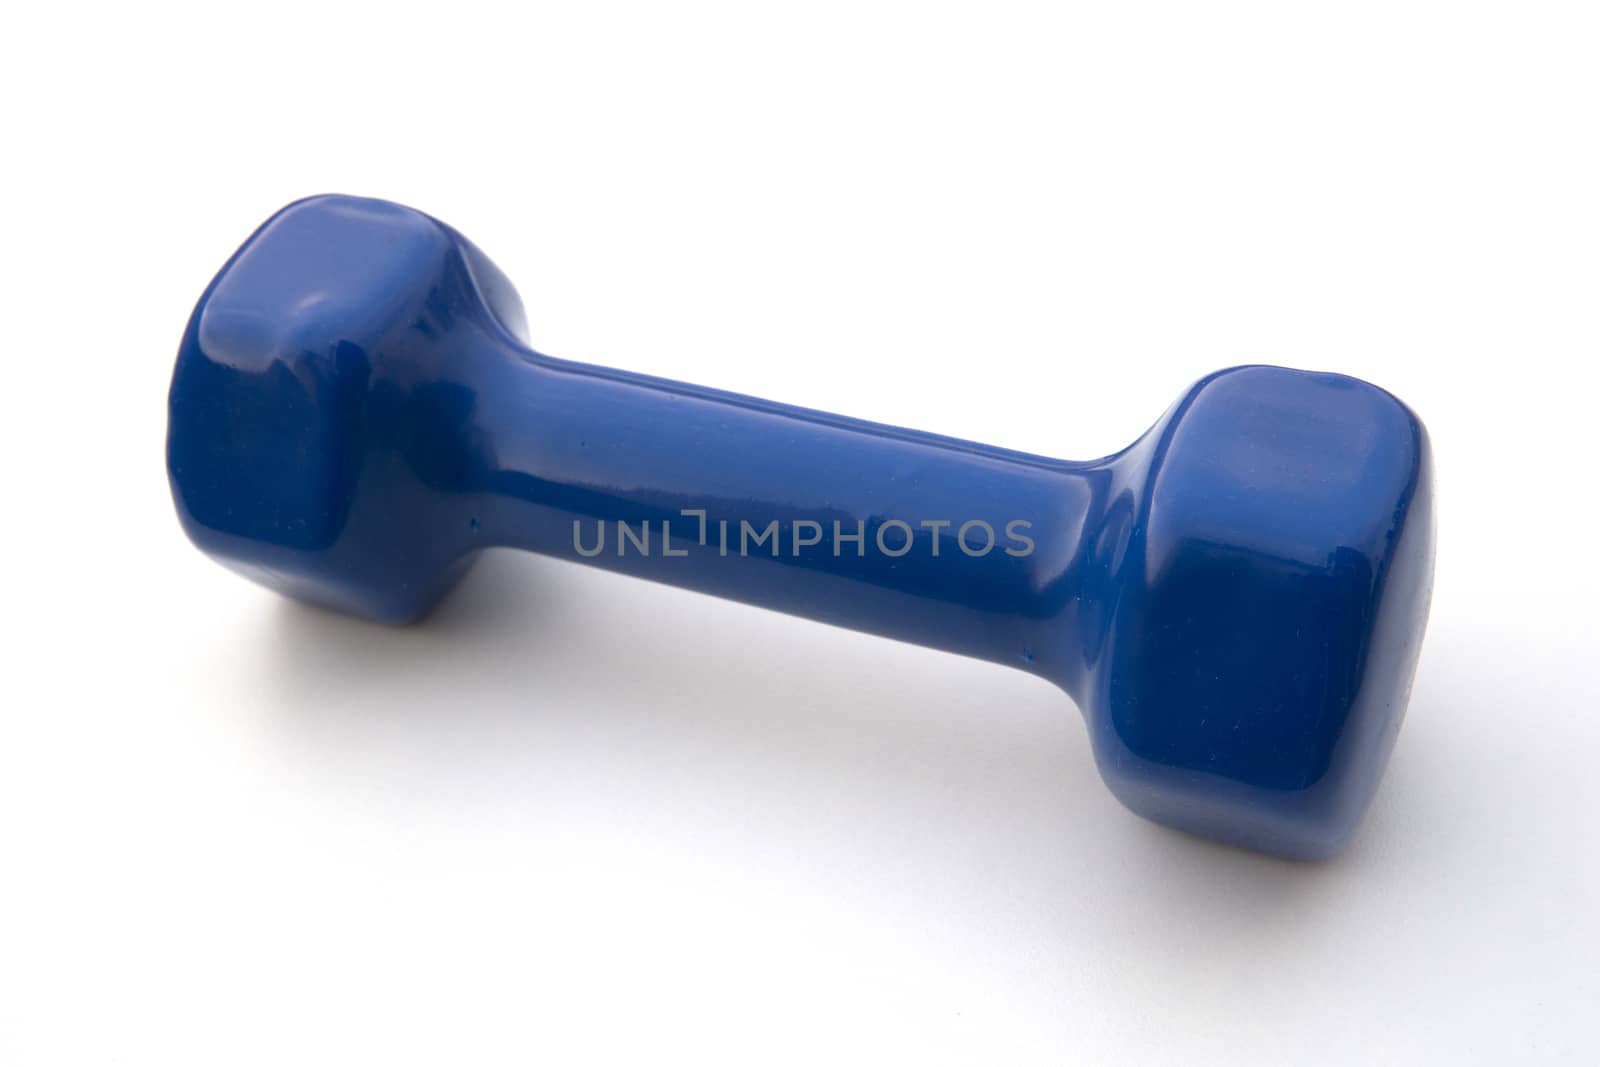 Blue Dumbell on white background weighing 2 kilograms by sonandonures